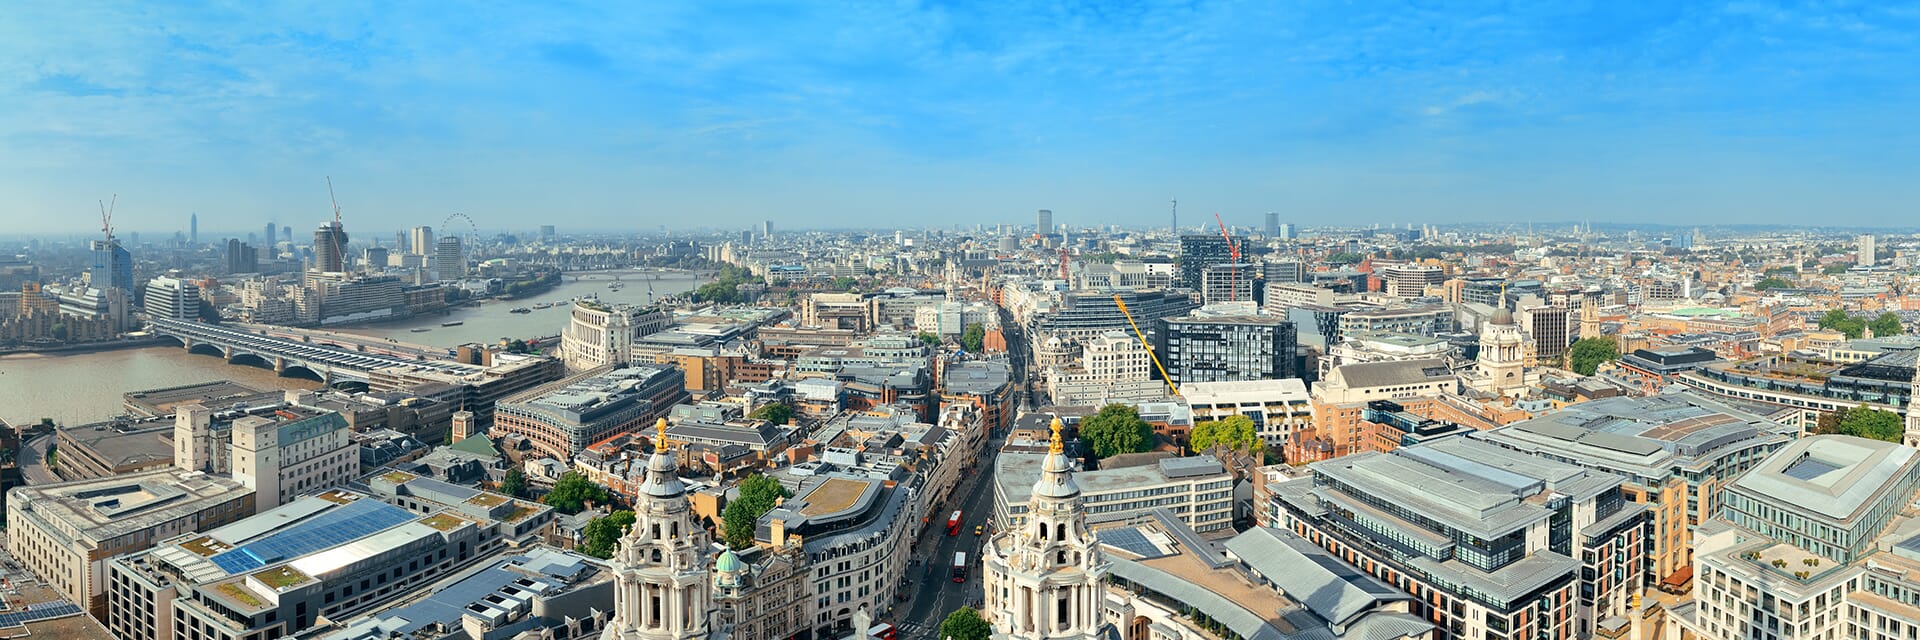 the-skys-the-limit-for-rooftop-homes-in-london-main-original